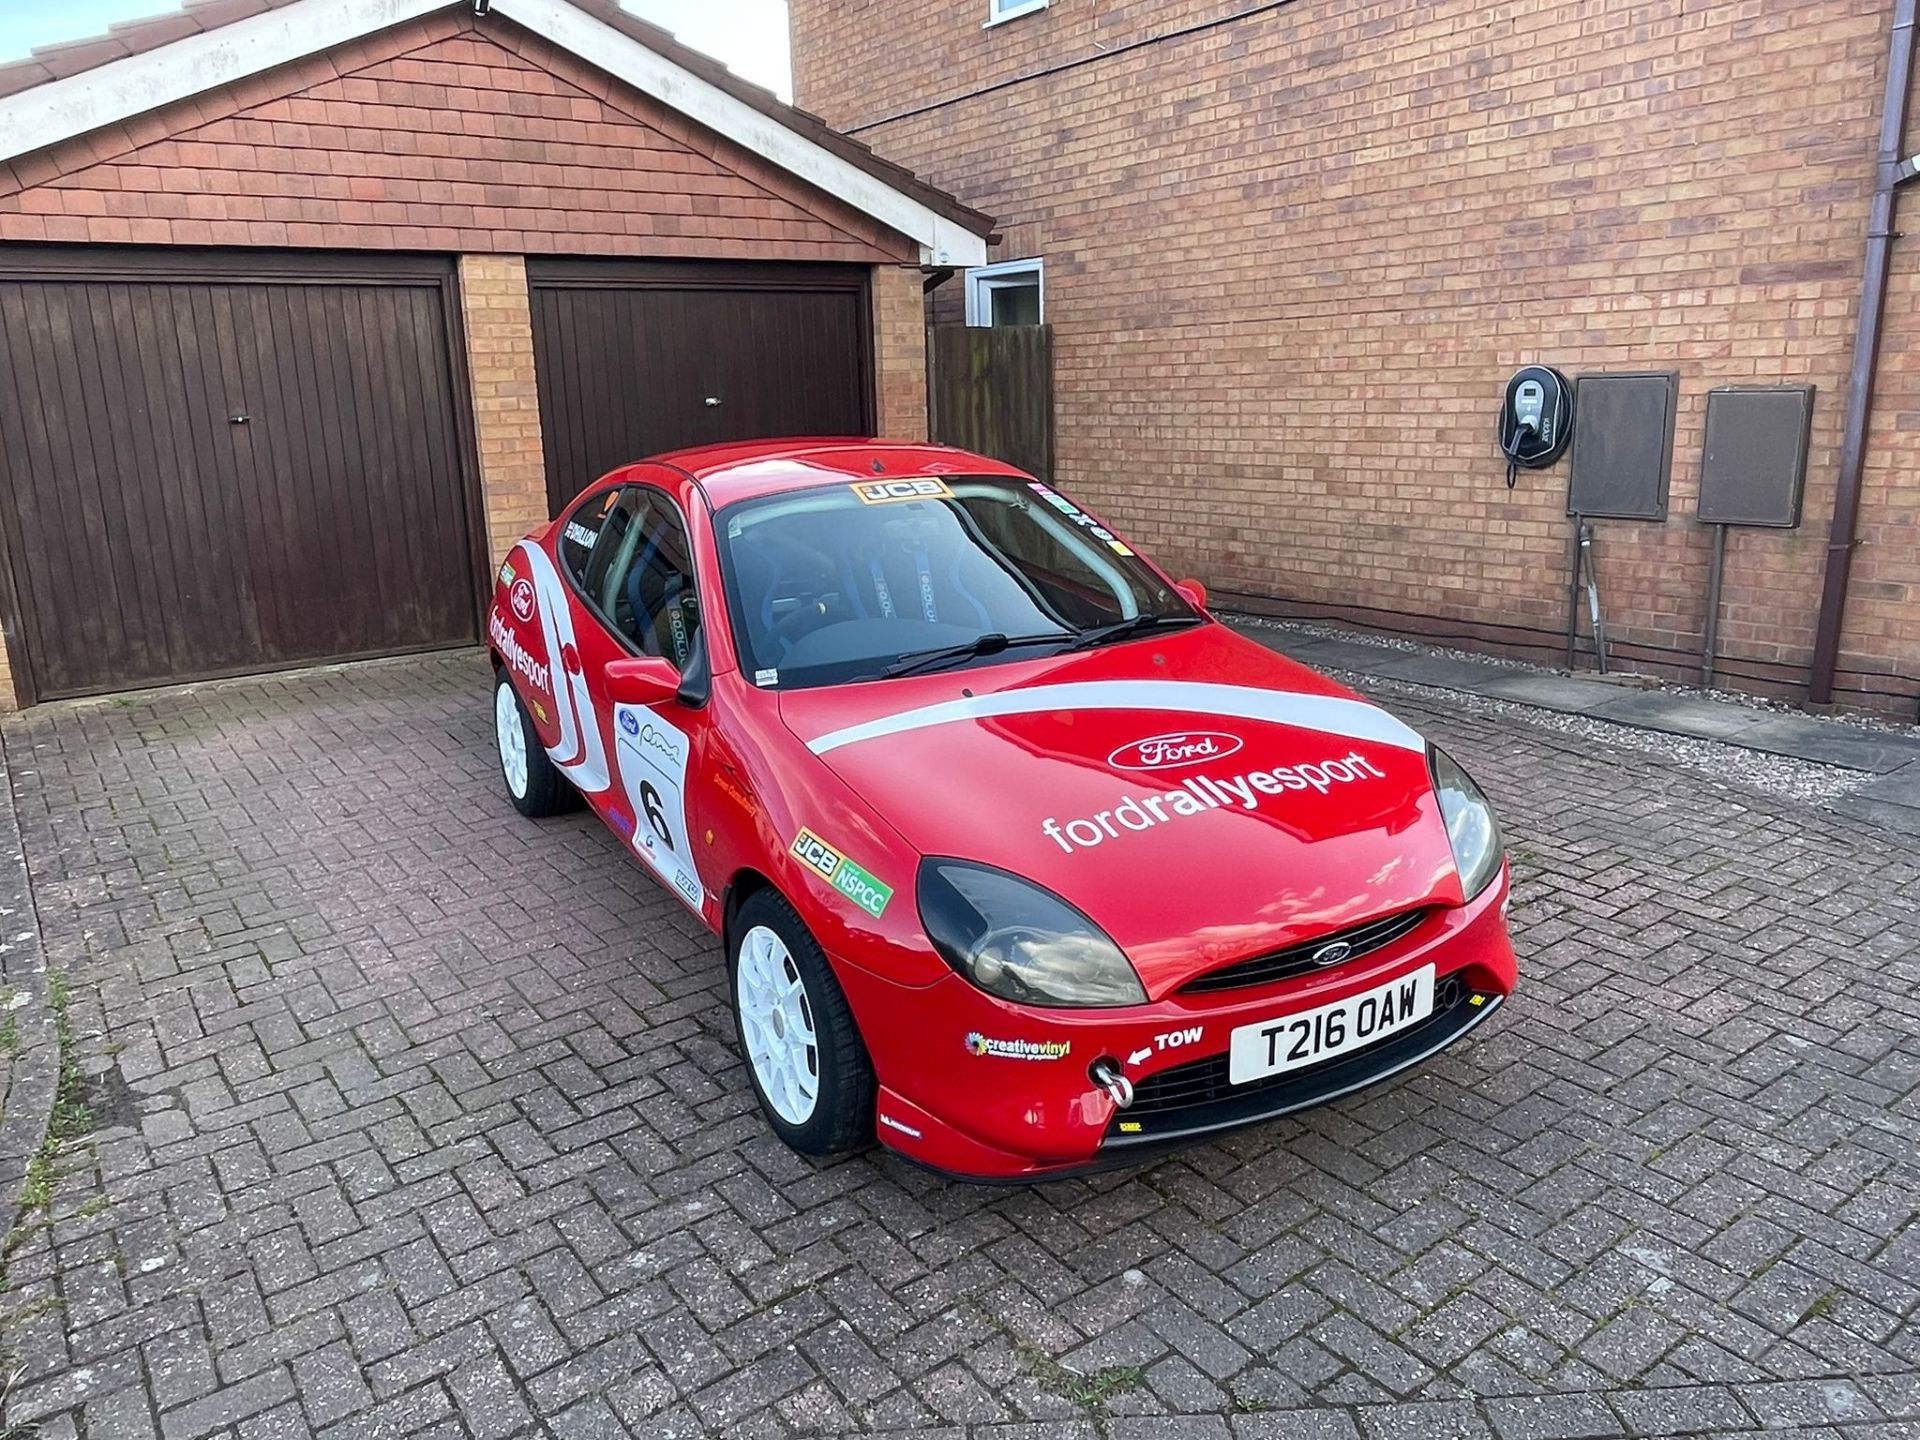 1999 FORD PUMA 1.7 16V RED COUPE, RALLY LIVERY, MOTORSPORTS WEIGHT REDUCTION *NO VAT* - Bild 2 aus 27